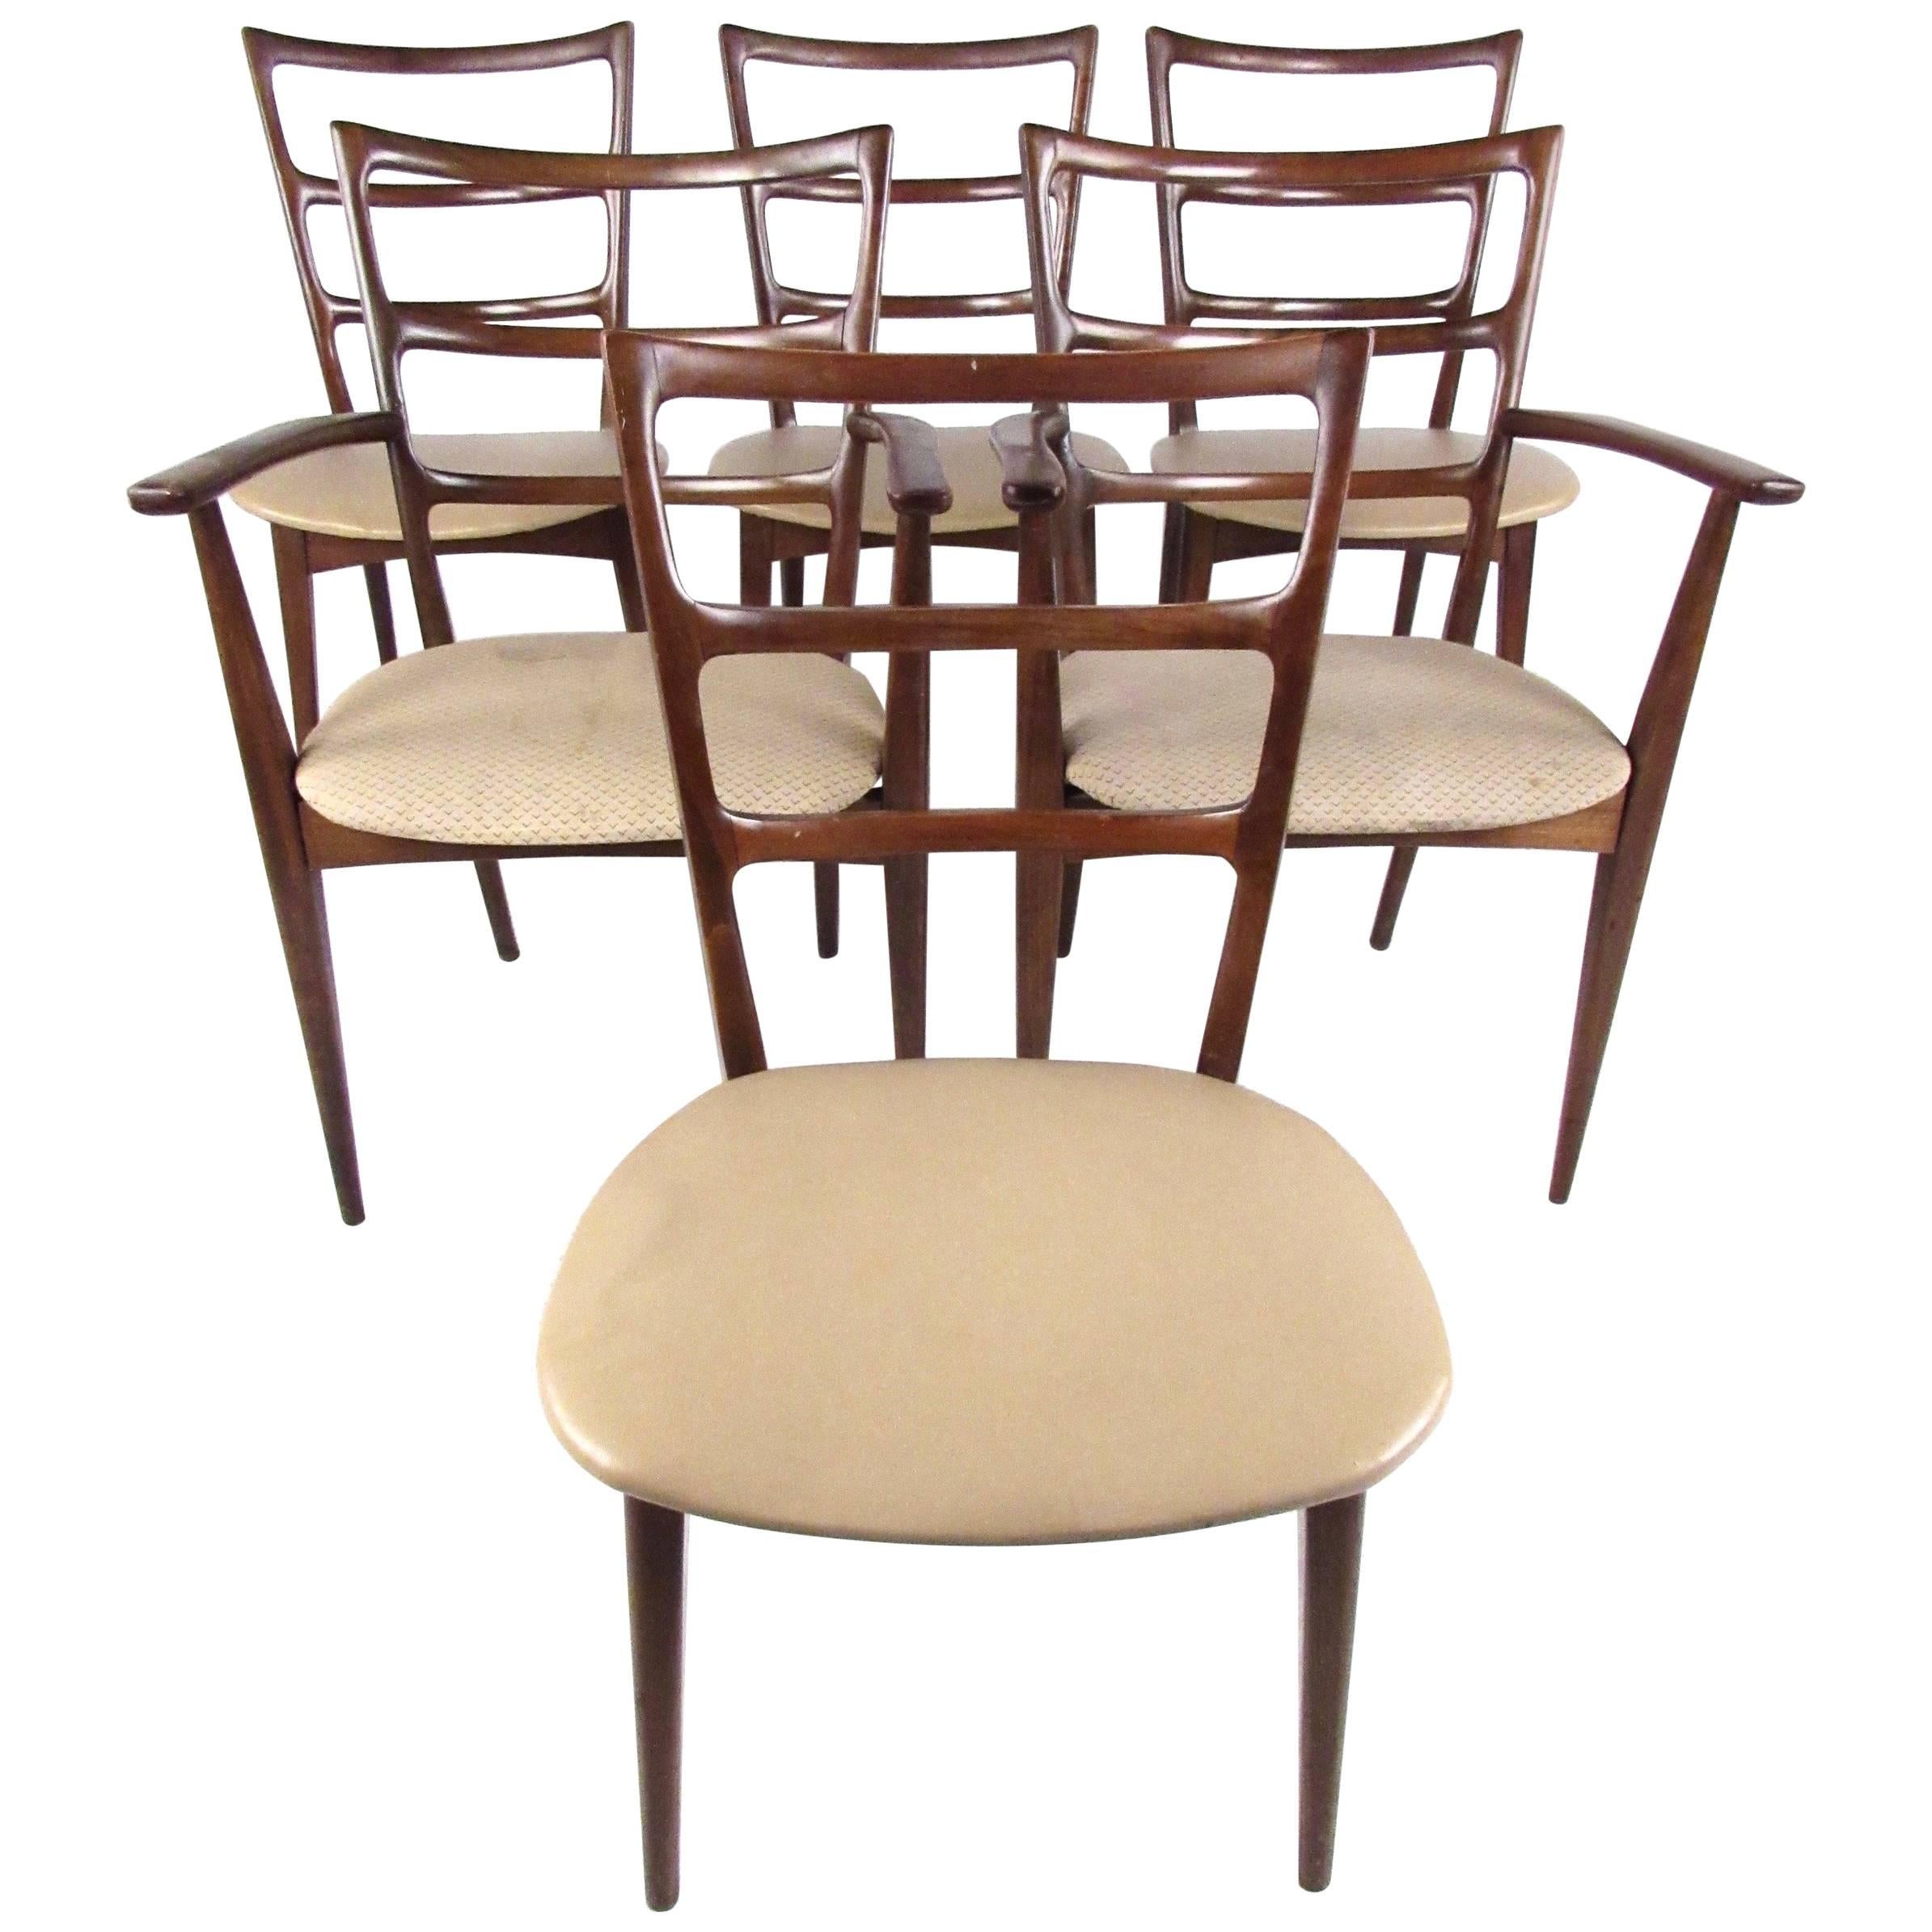 Six Ladder Back Dining Chairs For Sale